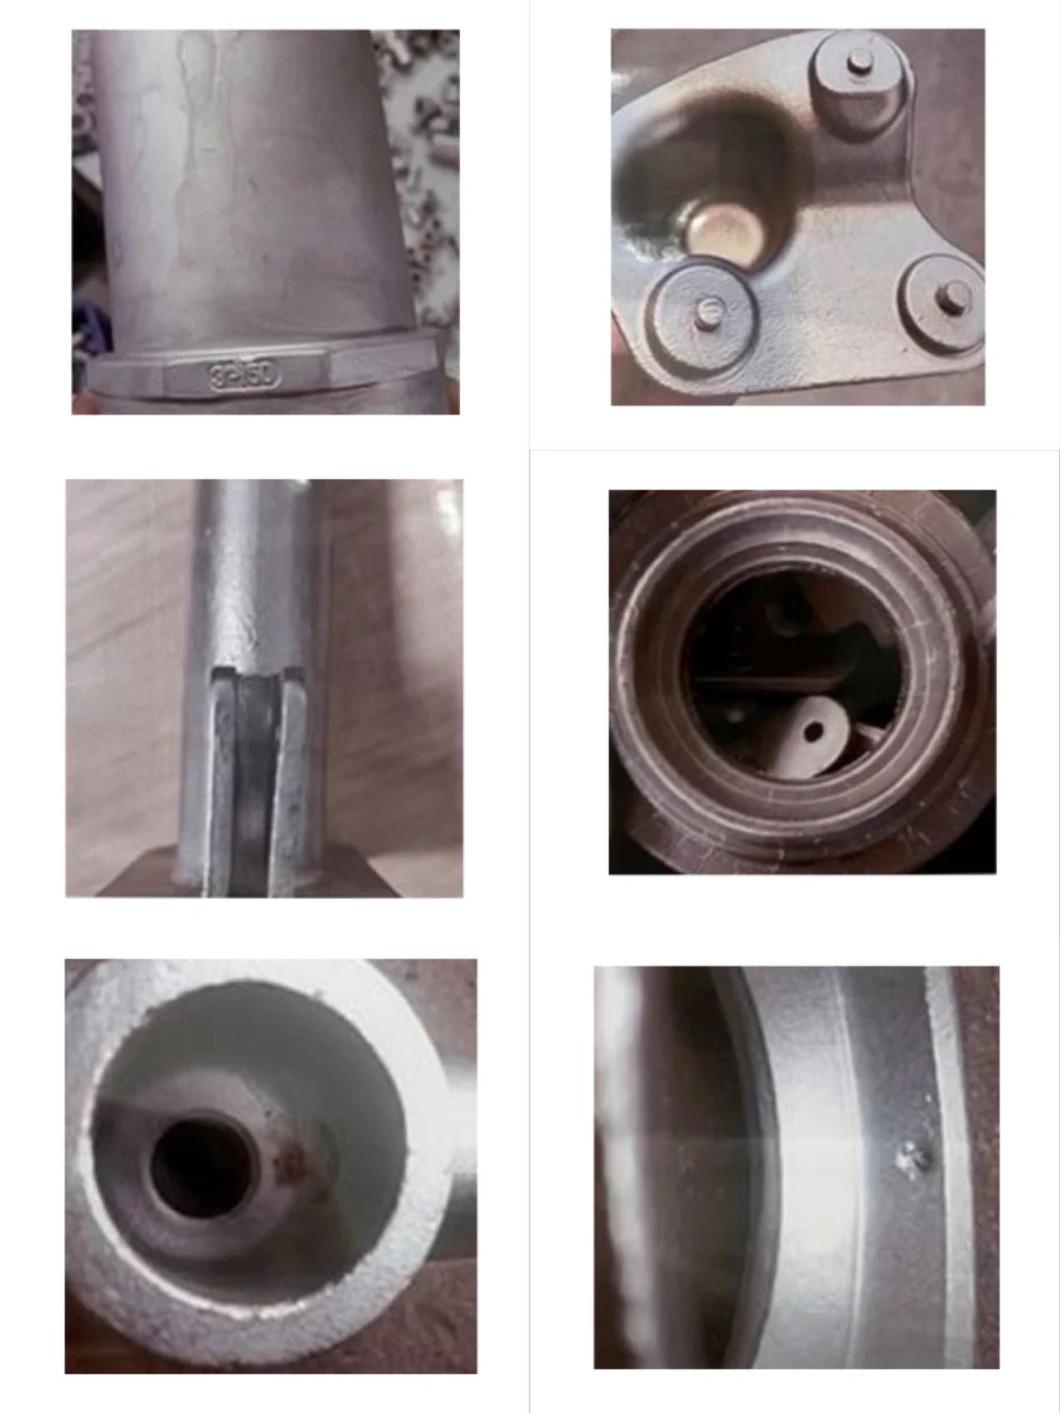 Customized Stainless Steel Pipe Fittings Lost Wax Casting Pump Shell Housing Machinery Parts